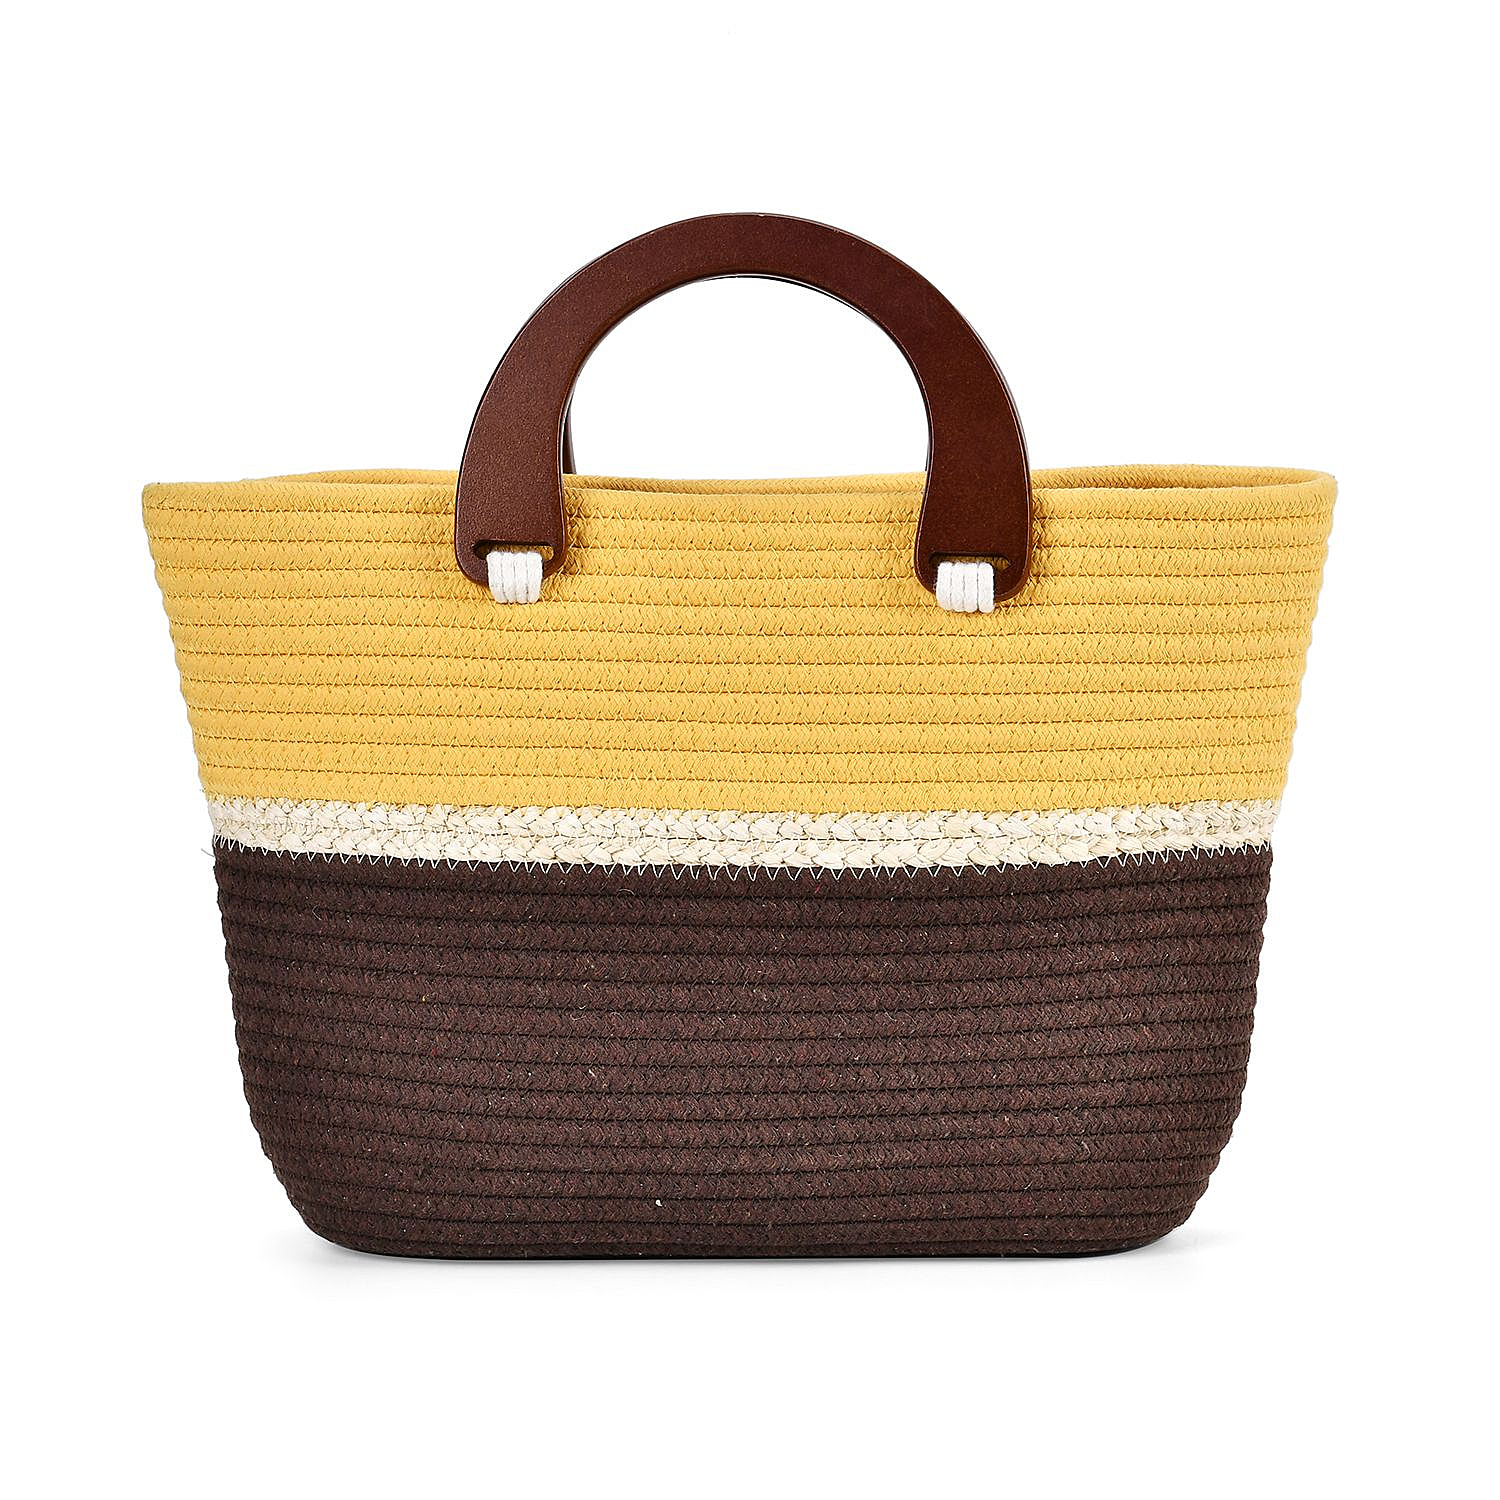 Cotton-Patterned-Tote-Bag-Size-40x29x26-cm-Yellow-Brown